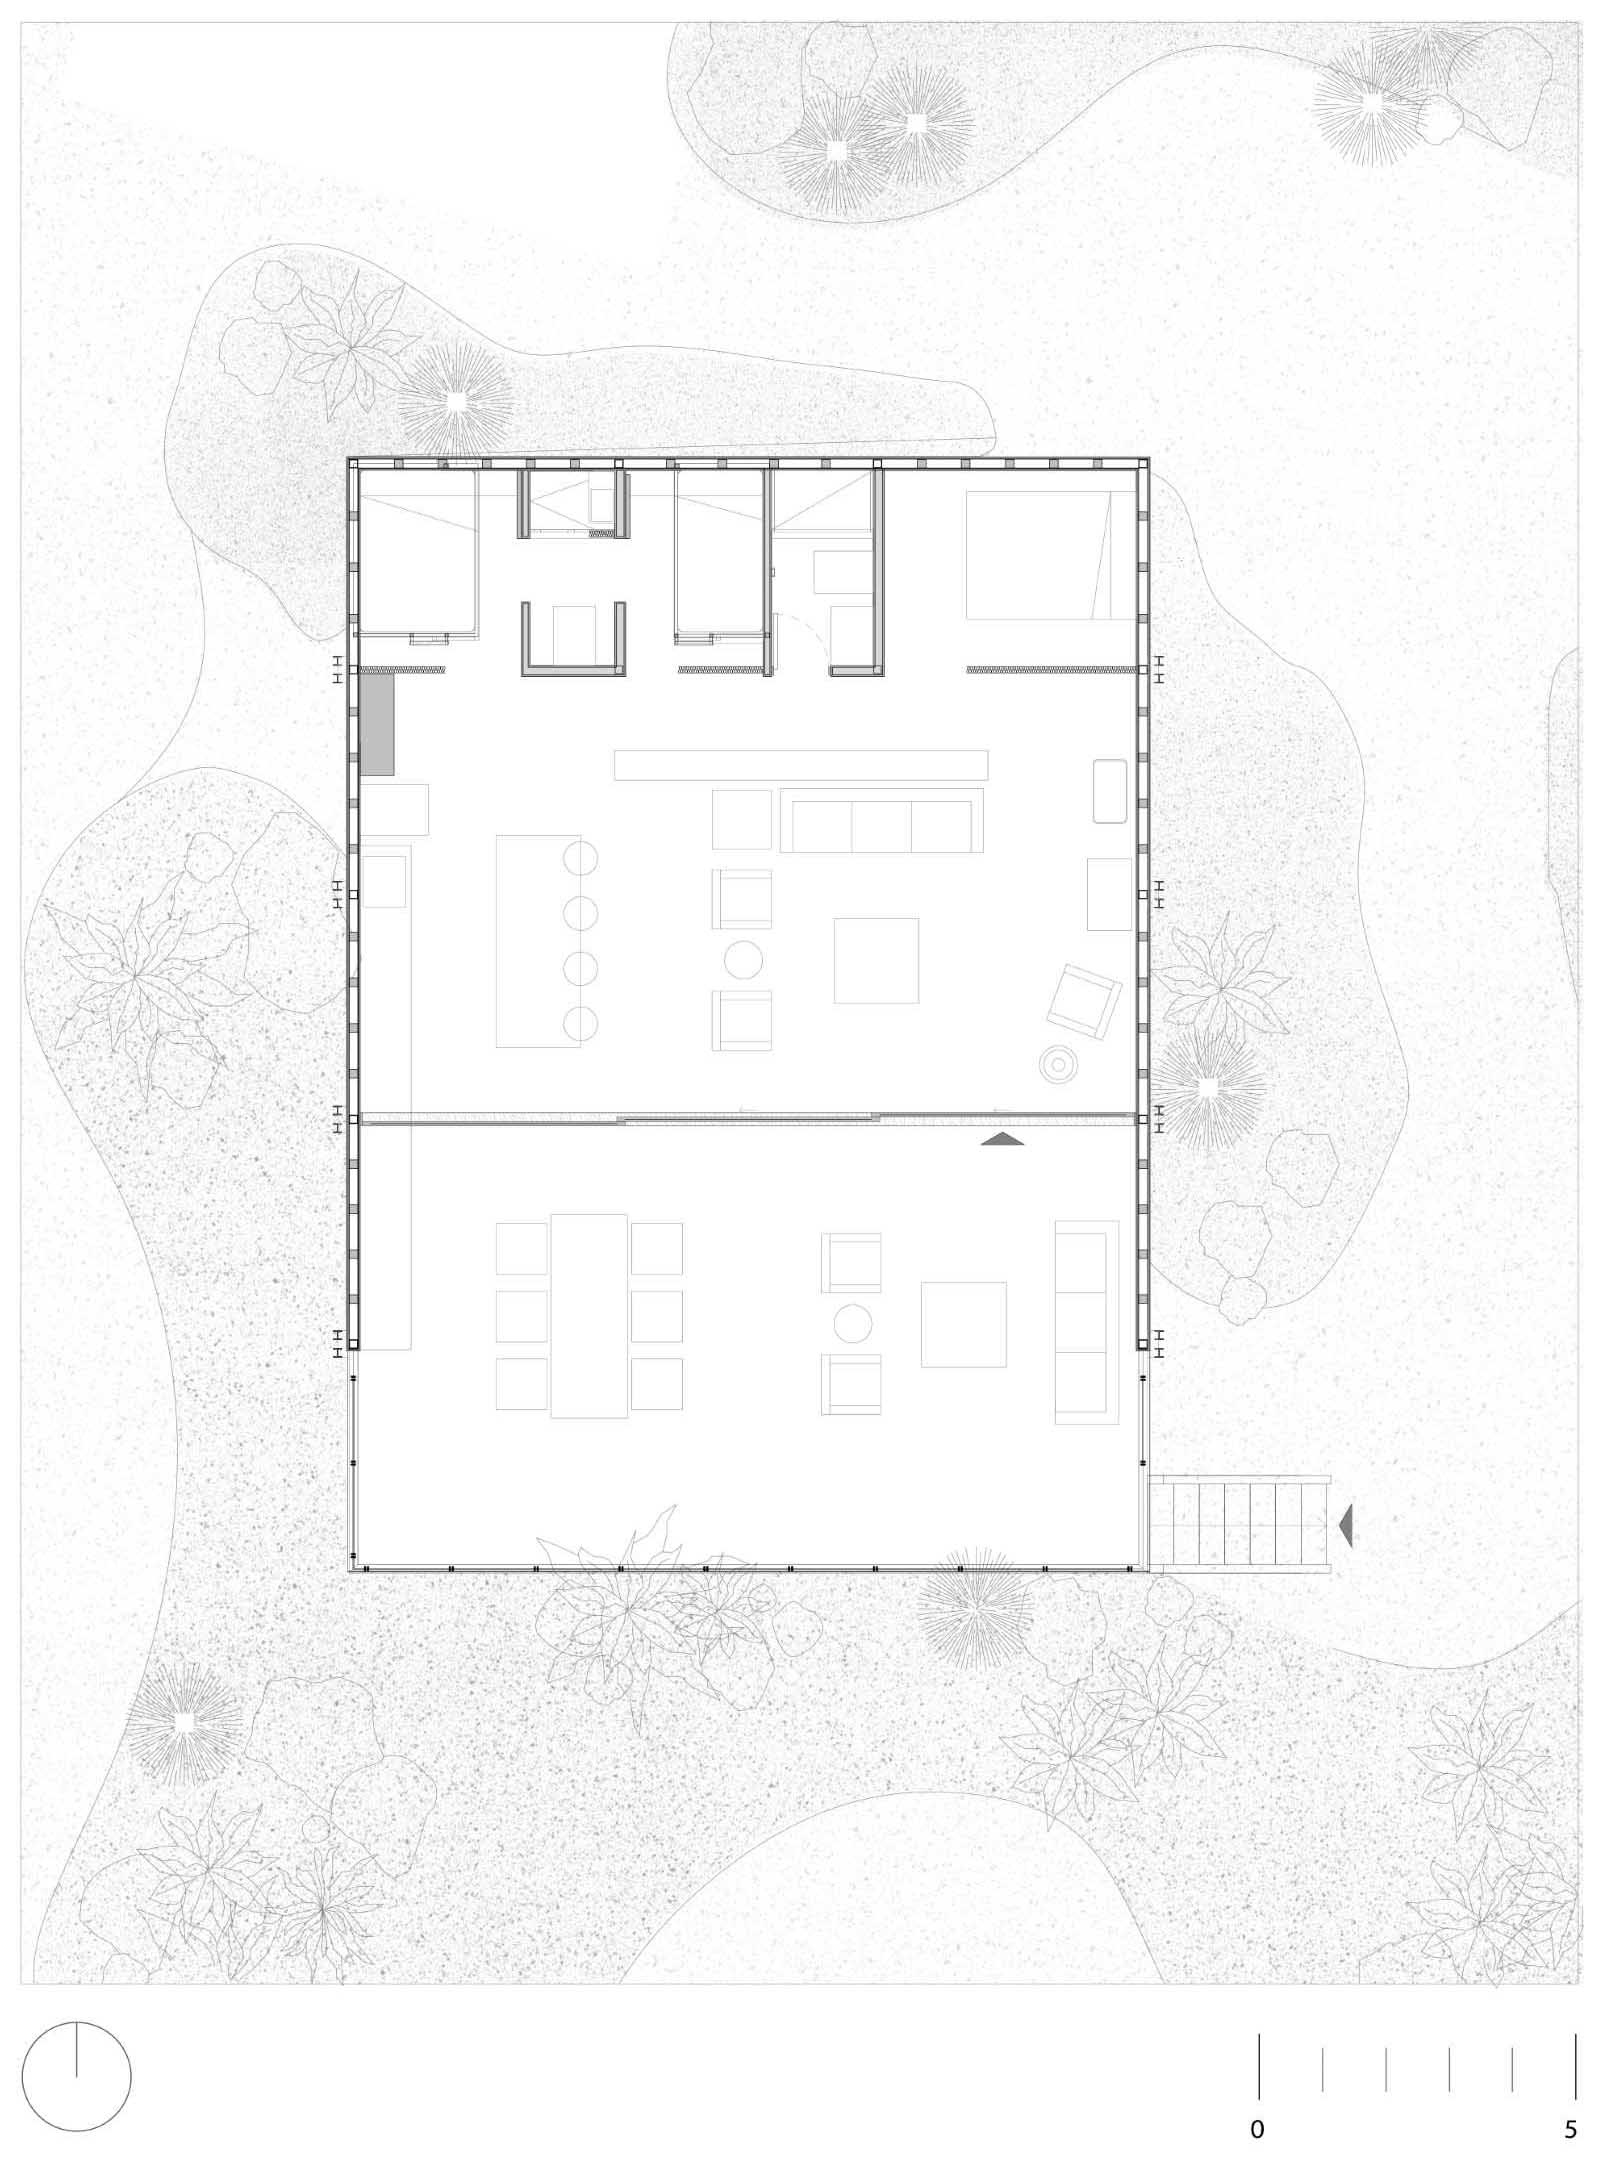 The floor plan of a tiny house.